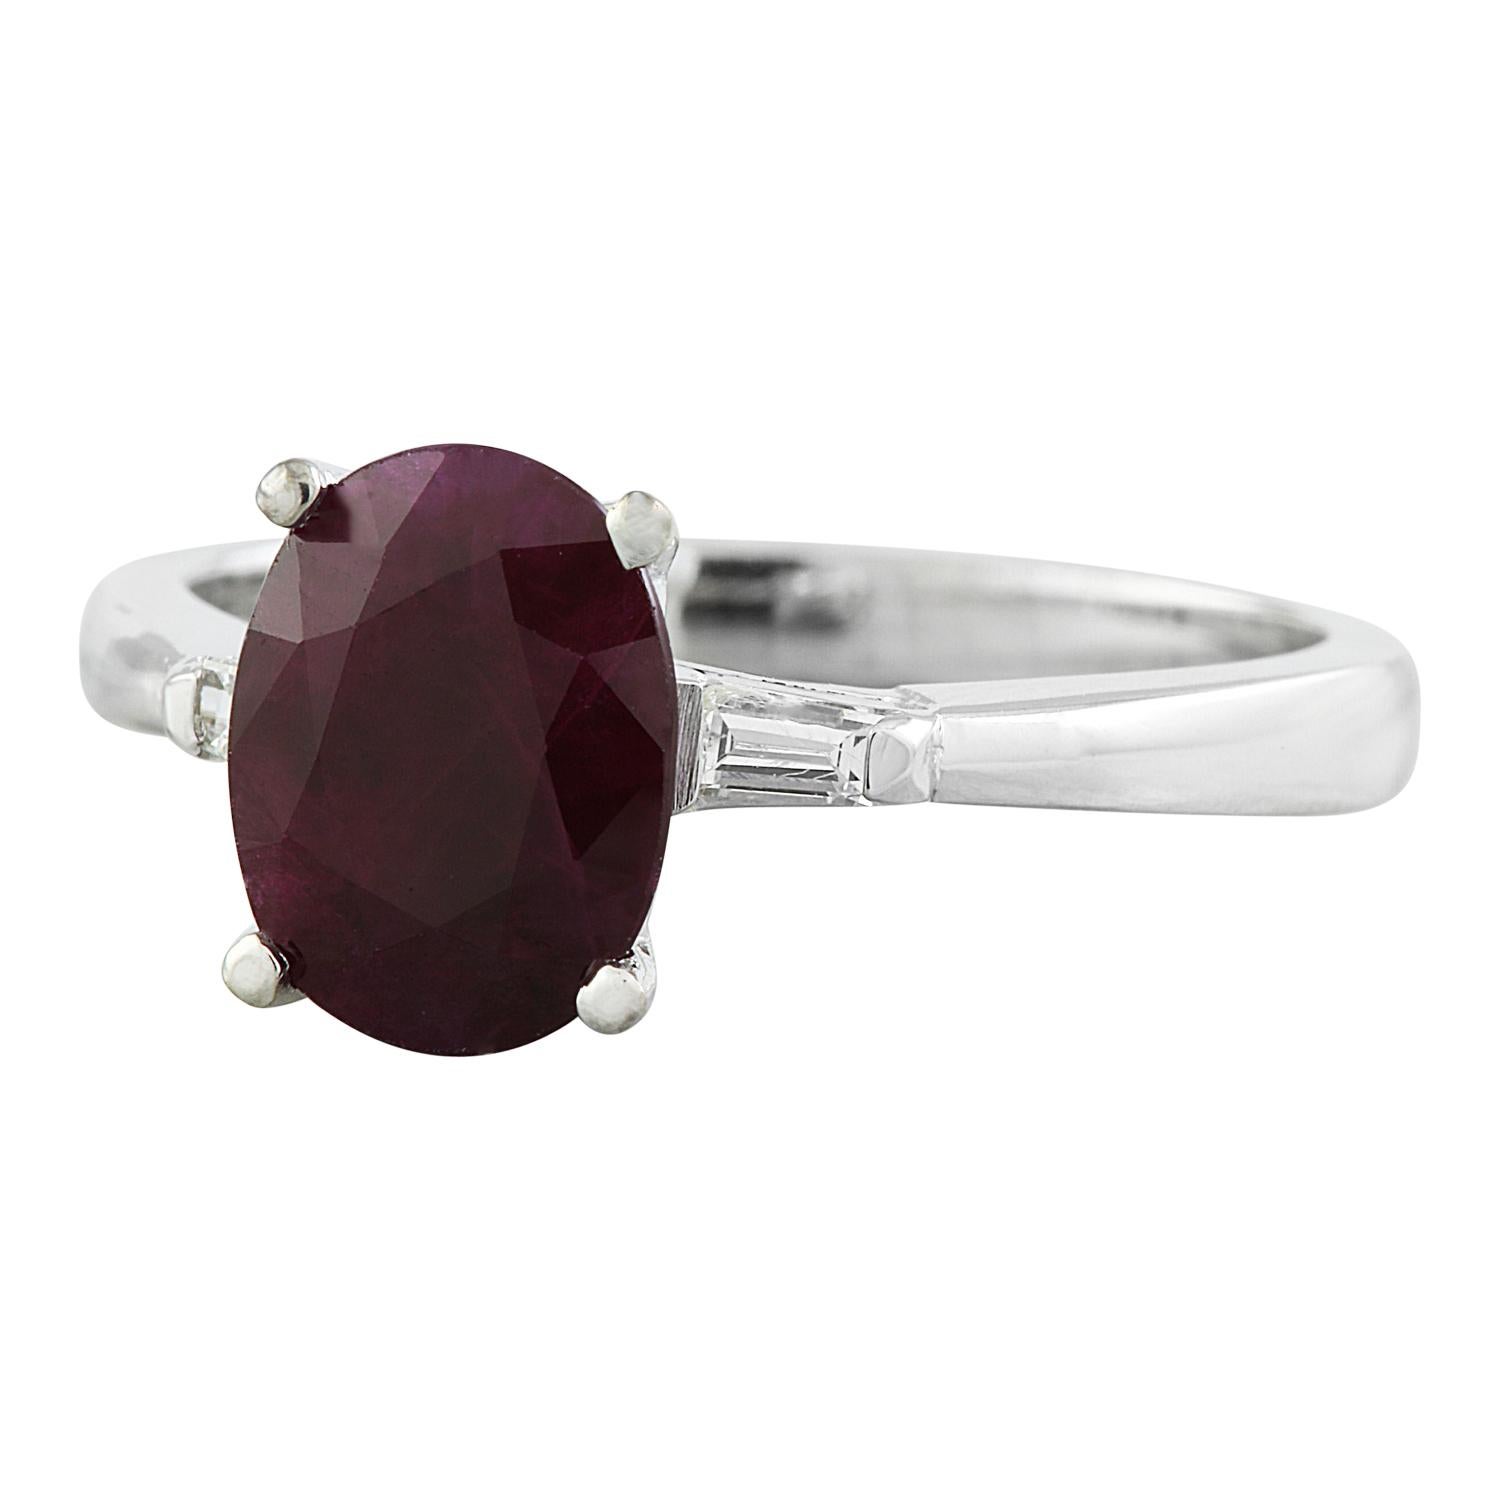 Introducing a mesmerizing work of art, the 1.70 Carat Natural Ruby 14 Karat Solid White Gold Diamond Ring, a testament to exquisite craftsmanship and timeless beauty.

This ring, designed for a ring size 7, boasts a total weight of 3.8 grams,